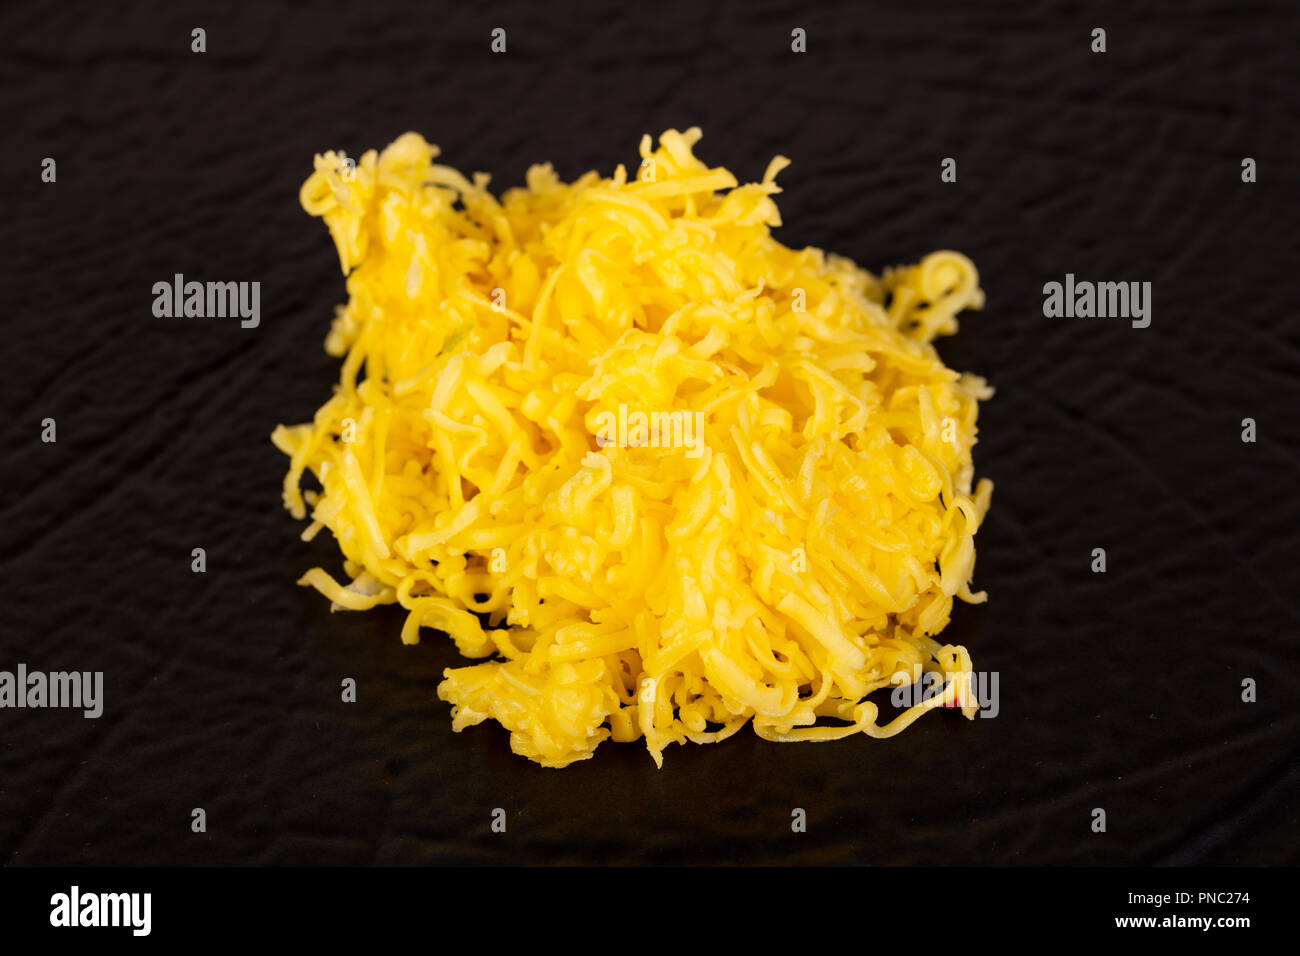 https://c8.alamy.com/comp/PNC274/shredded-yellow-cheese-topping-heap-PNC274.jpg